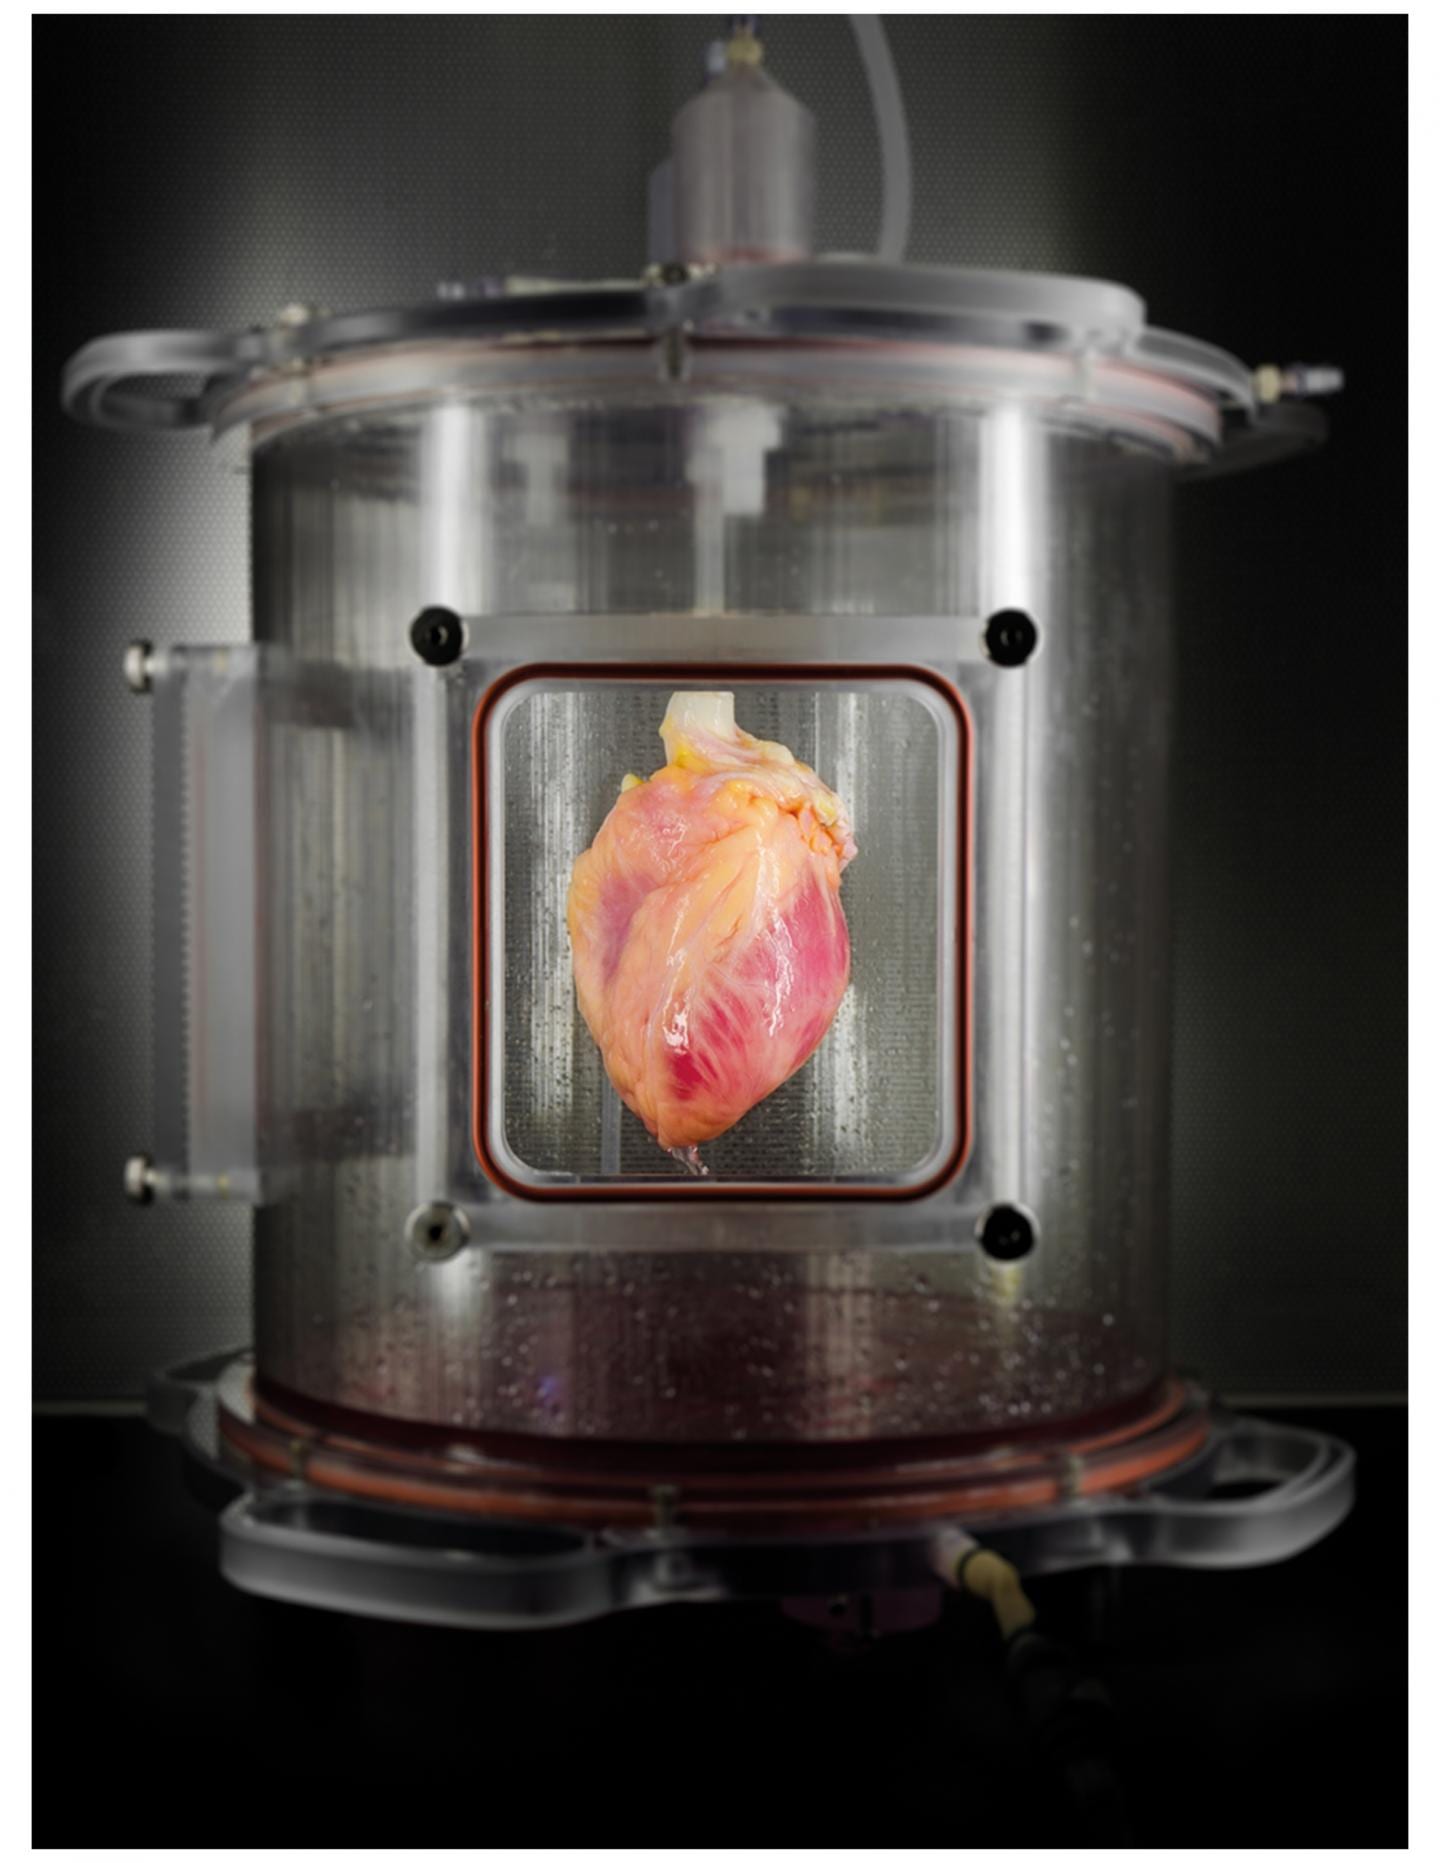 Functional heart muscle regenerated in decellularized human hearts as first steps to bioengineered human hearts